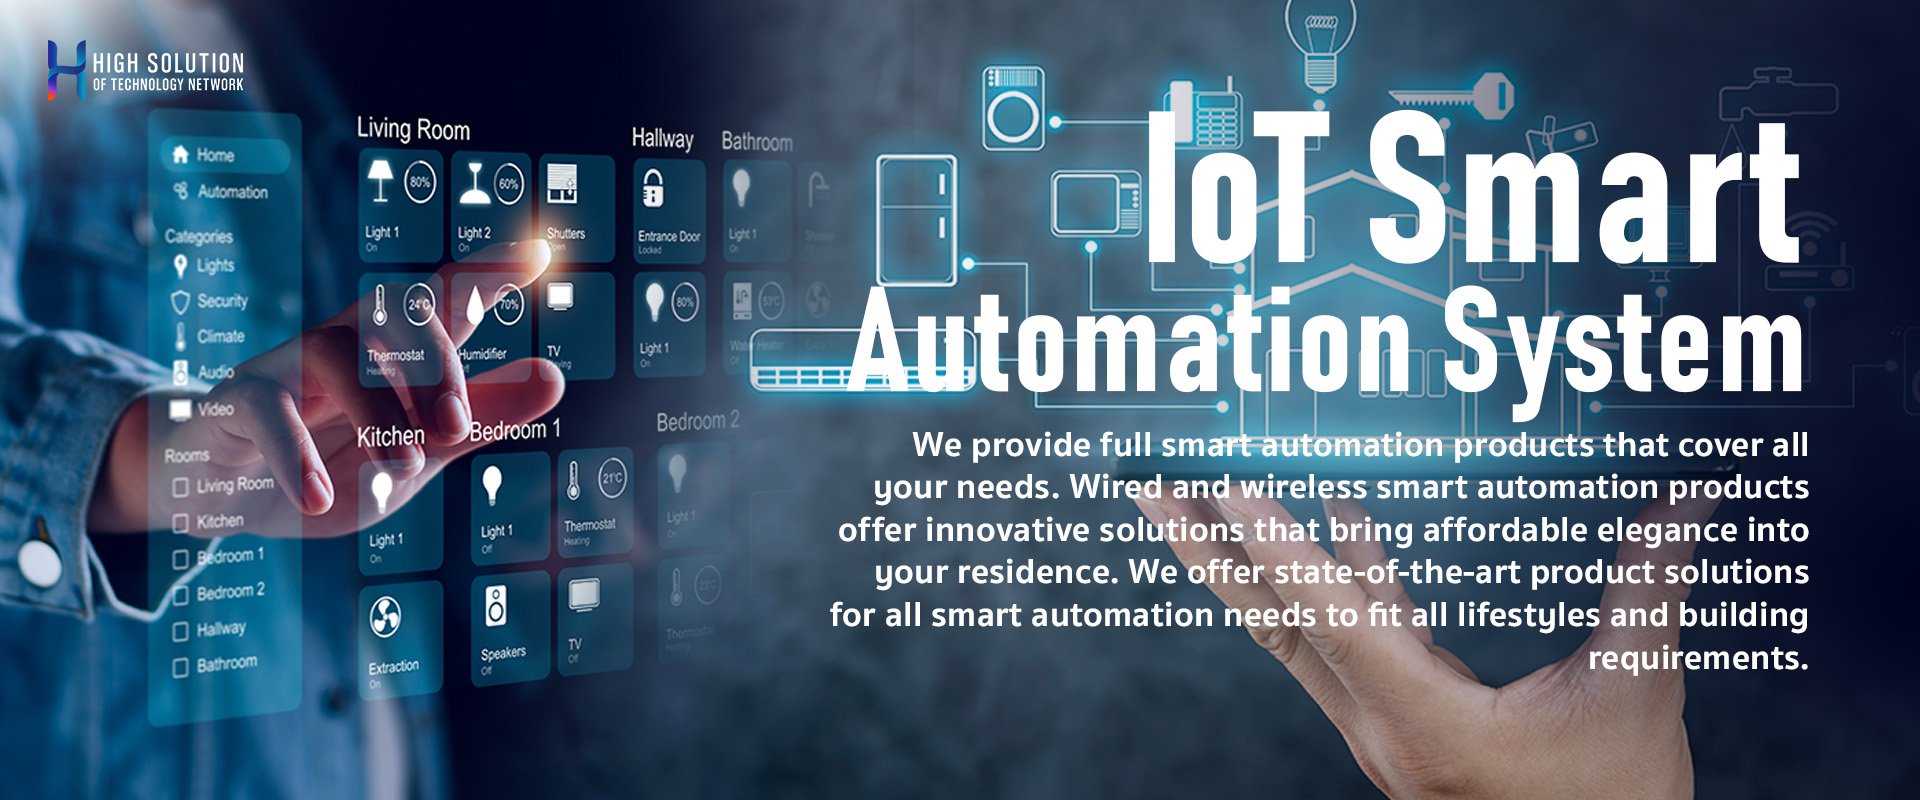 Iot_Smart_Automation_System_By_Highsolution